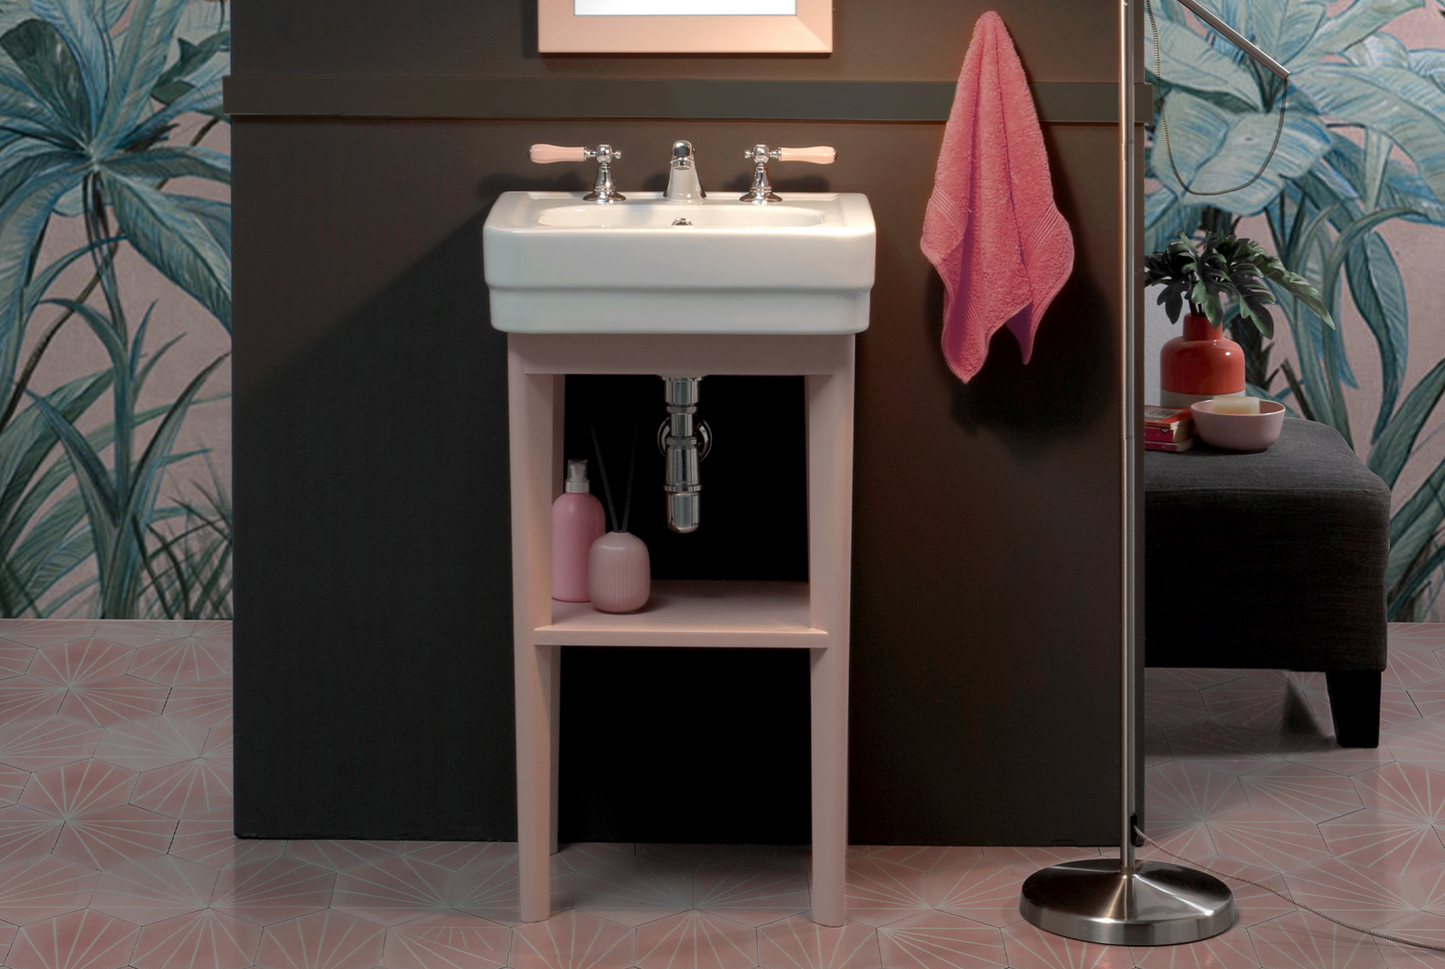 Classic style ceramic sink with open wooden cabinet